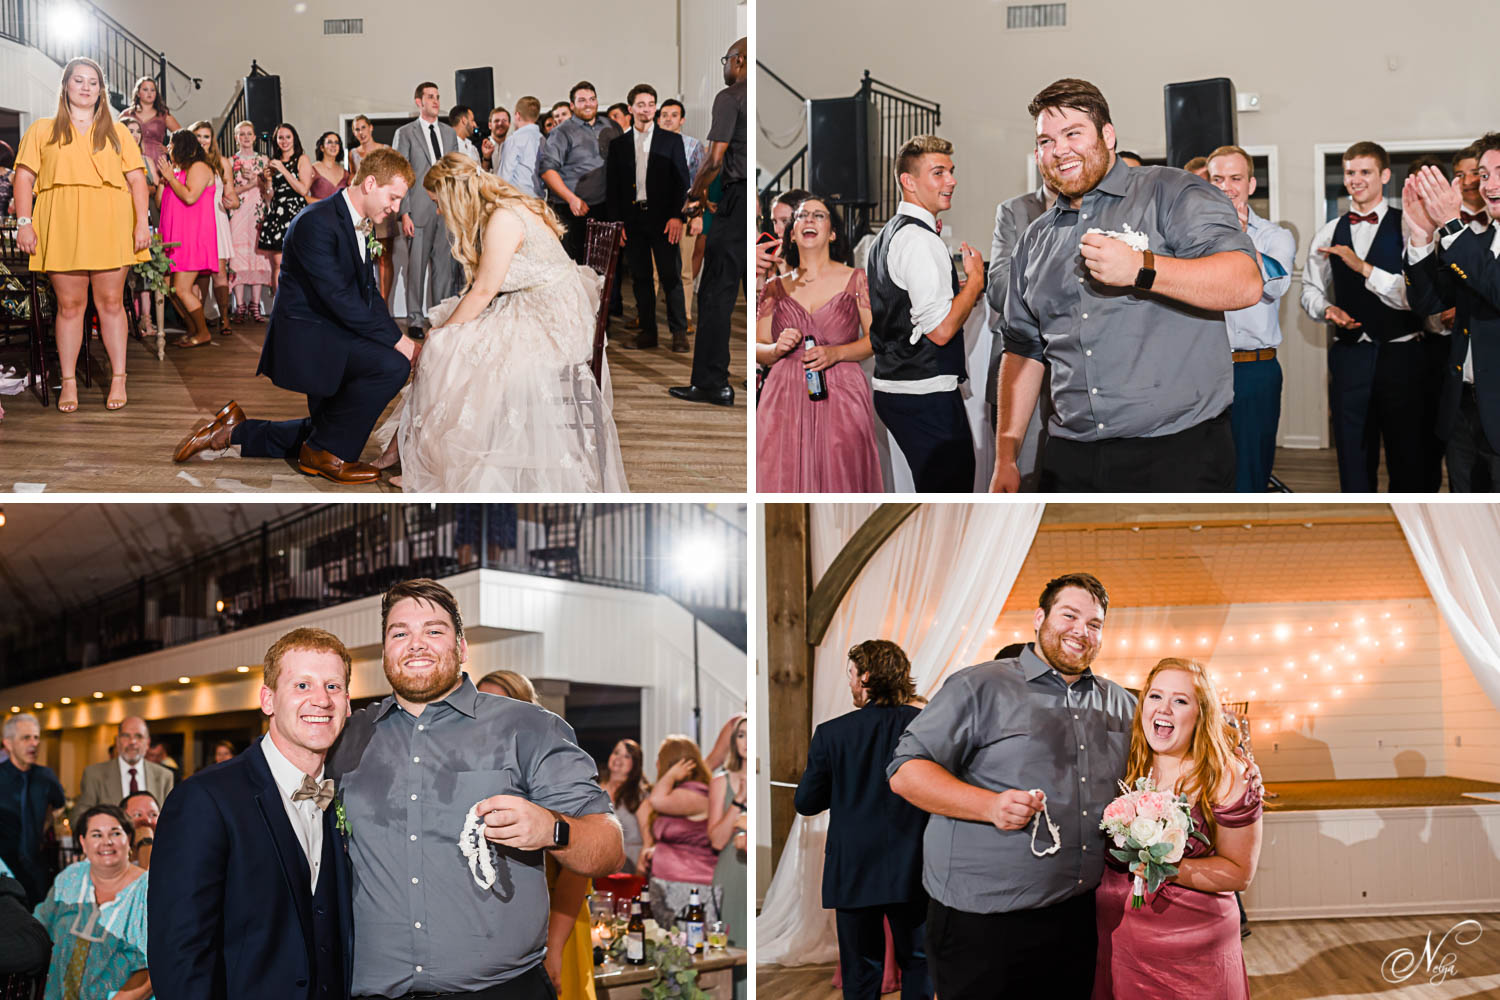 groom removing bride's garter and tossing it to single guys at wedding reception